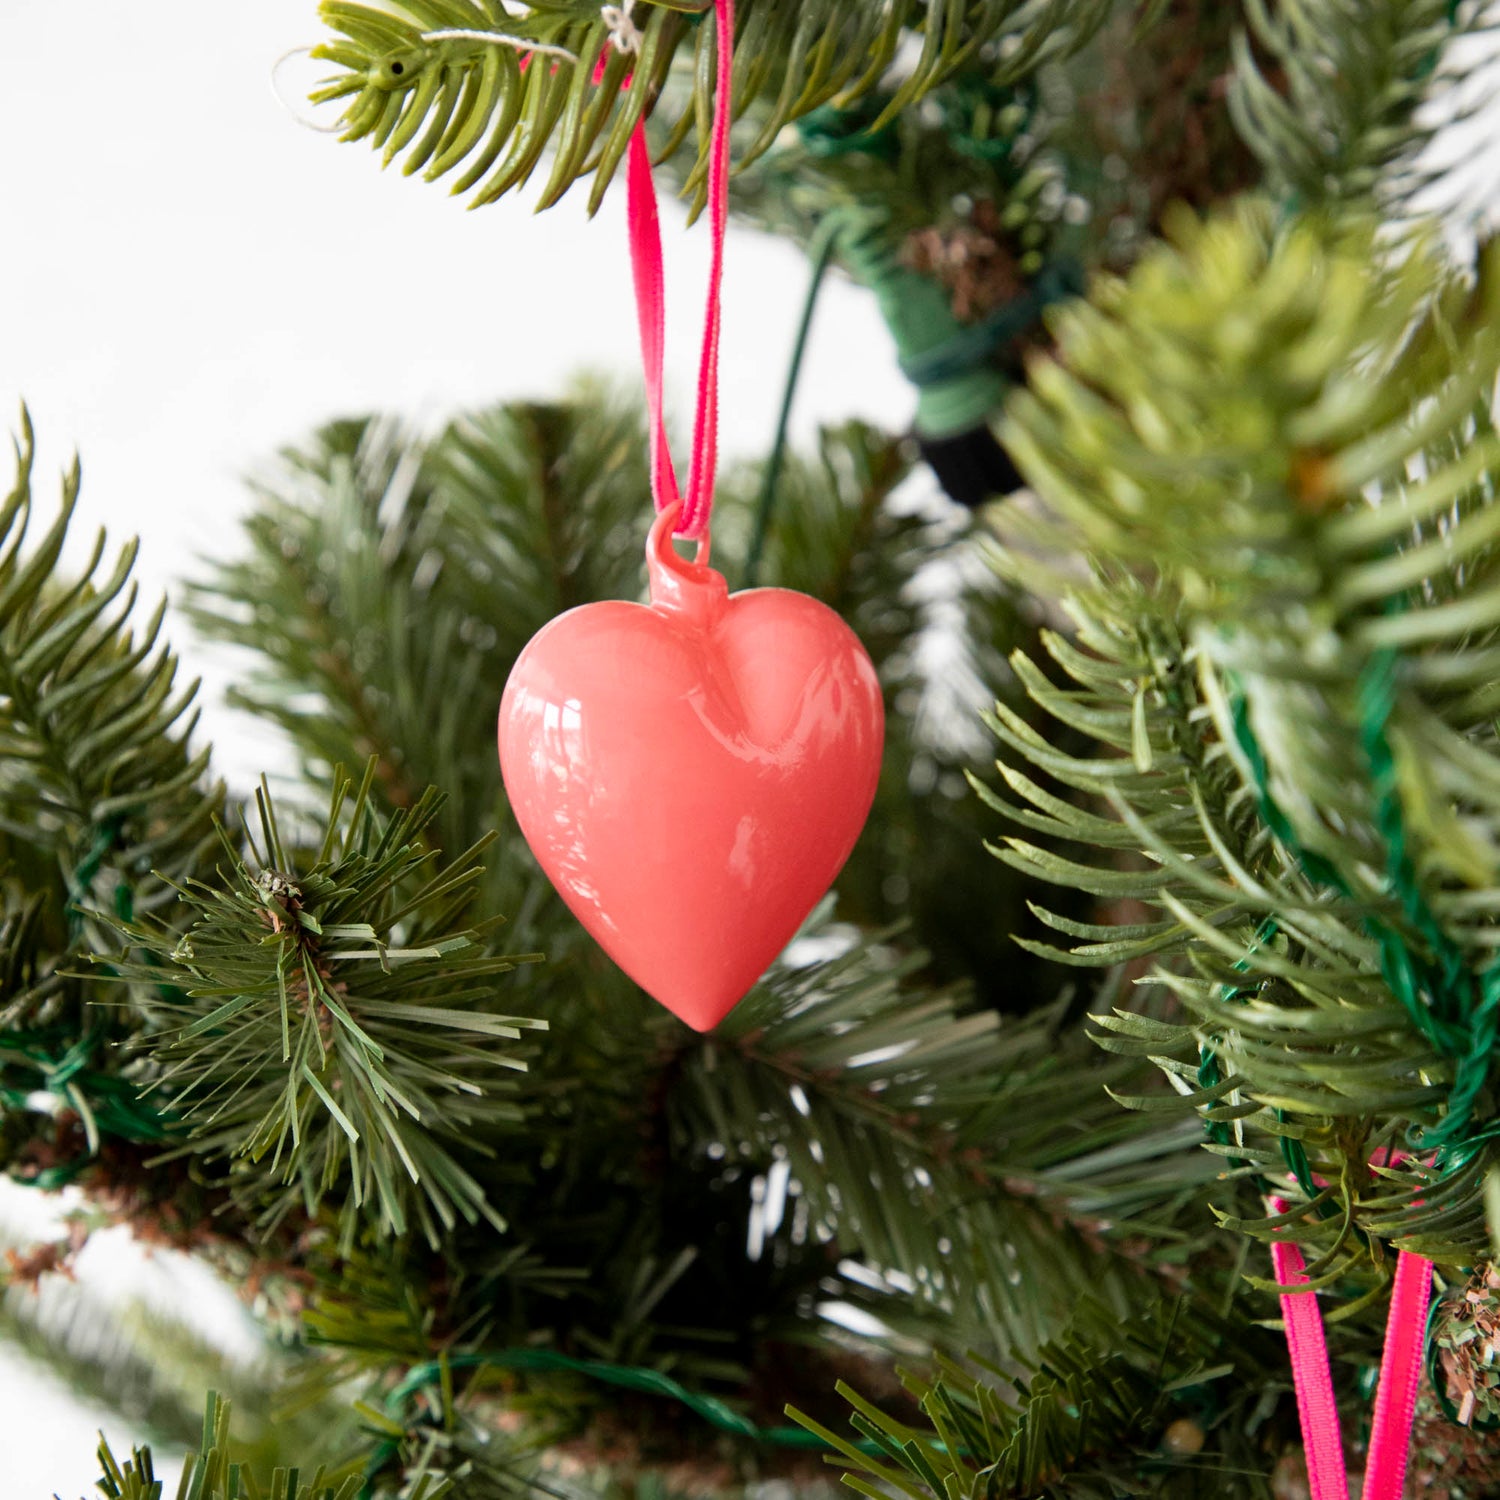 Vibrant Glitterville heart ornaments hanging on a Christmas tree.